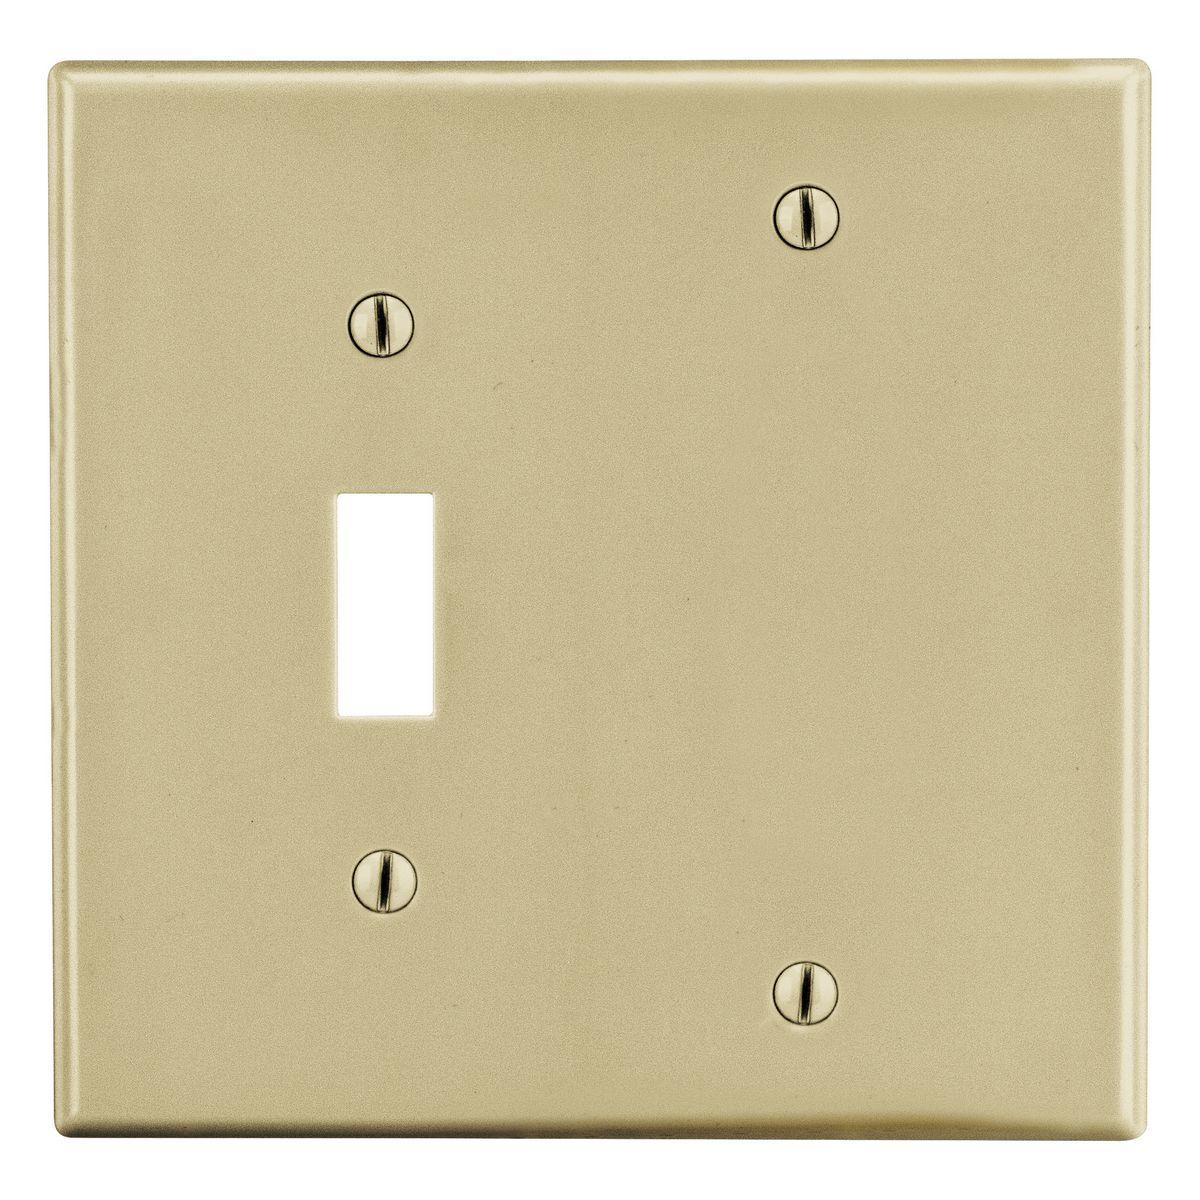 Hubbell PJ113I Wallplate, Mid-Size 2-Gang, 1) Toggle 1) Box Mount Blank, Ivory  ; High-impact, self-extinguishing polycarbonate material ; More Rigid ; Sharp lines and less dimpling ; Smooth satin finish ; Blends into wall with an optimum finish ; Smooth Satin Finish